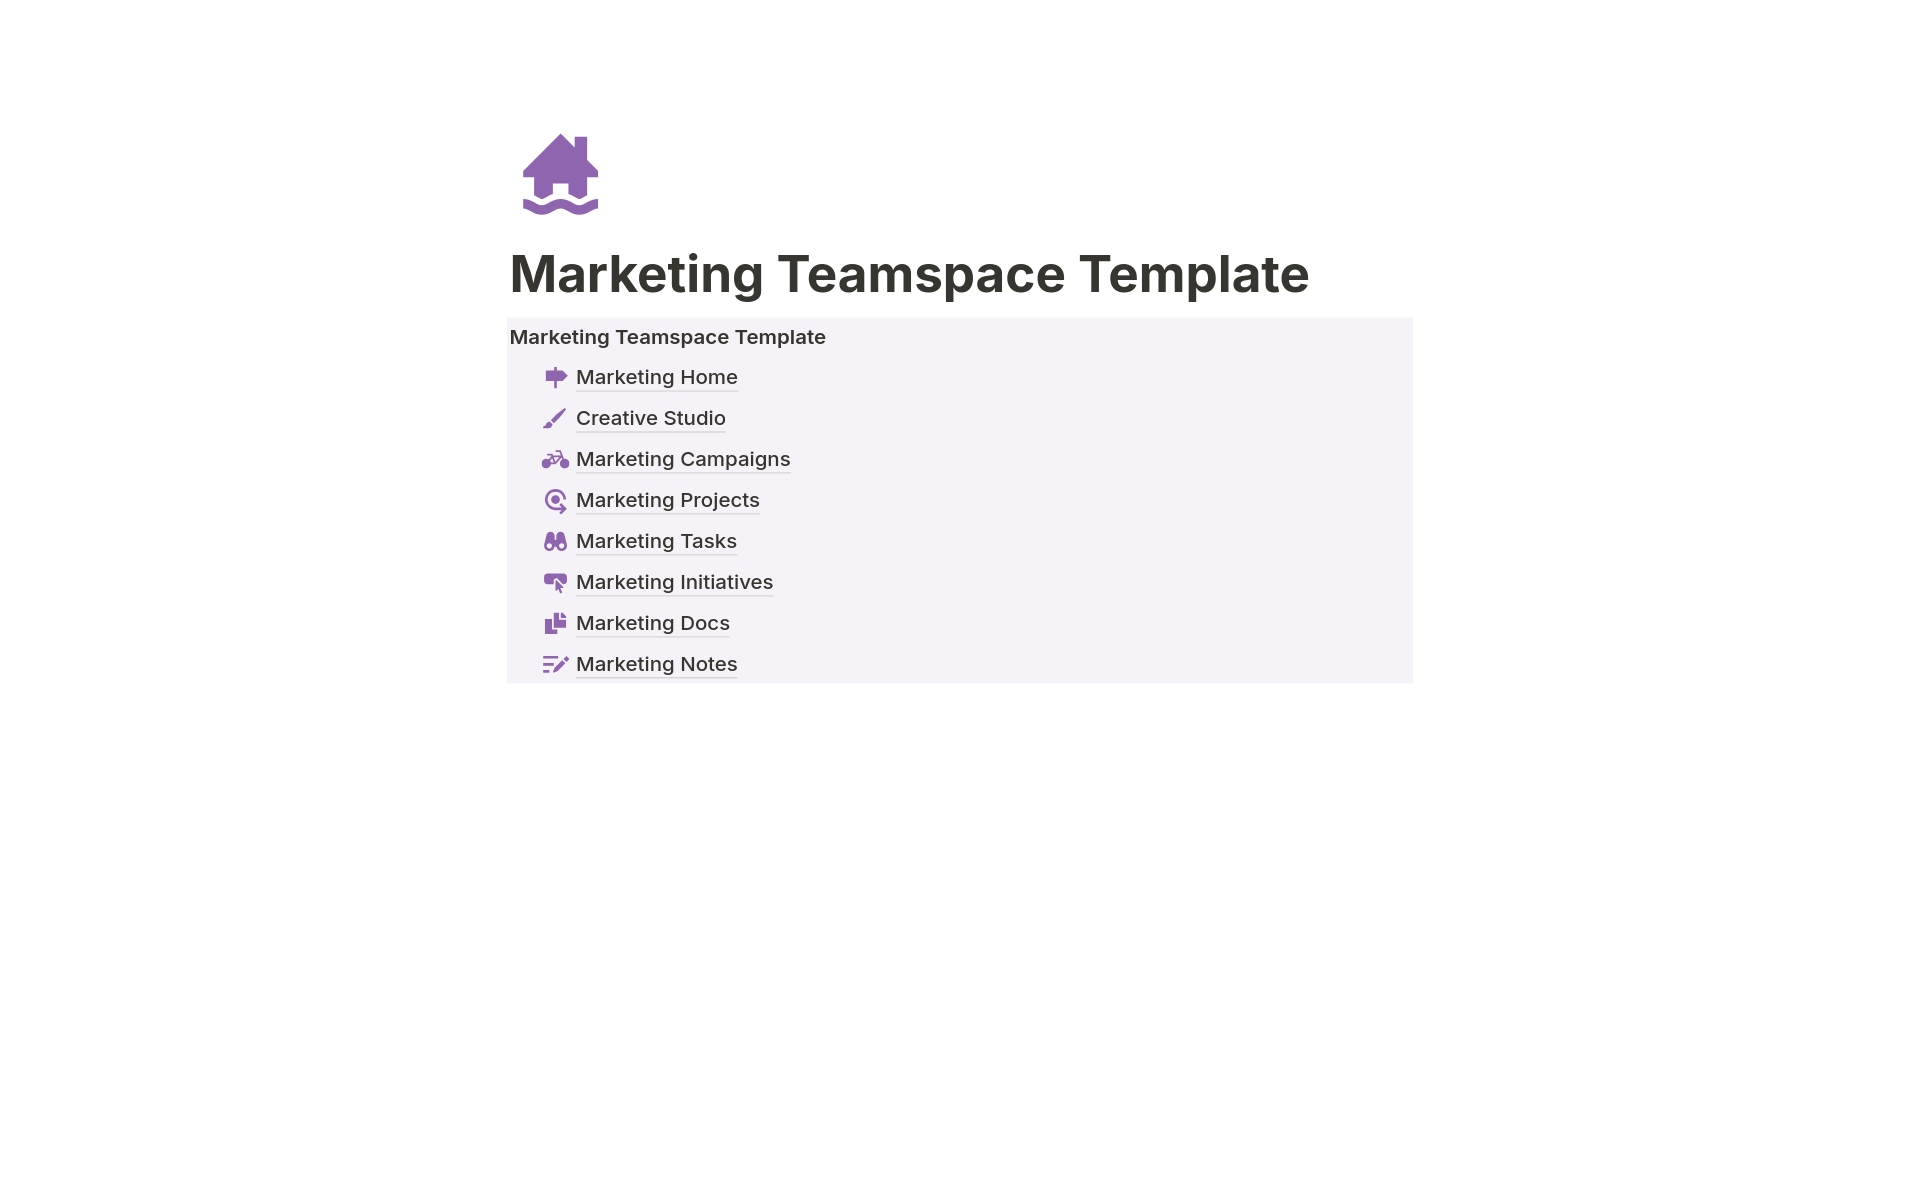 These templates offer a quick start to a fully organized workspace, allowing you to duplicate entire teamspaces effortlessly, saving time and fostering collaboration across your company.